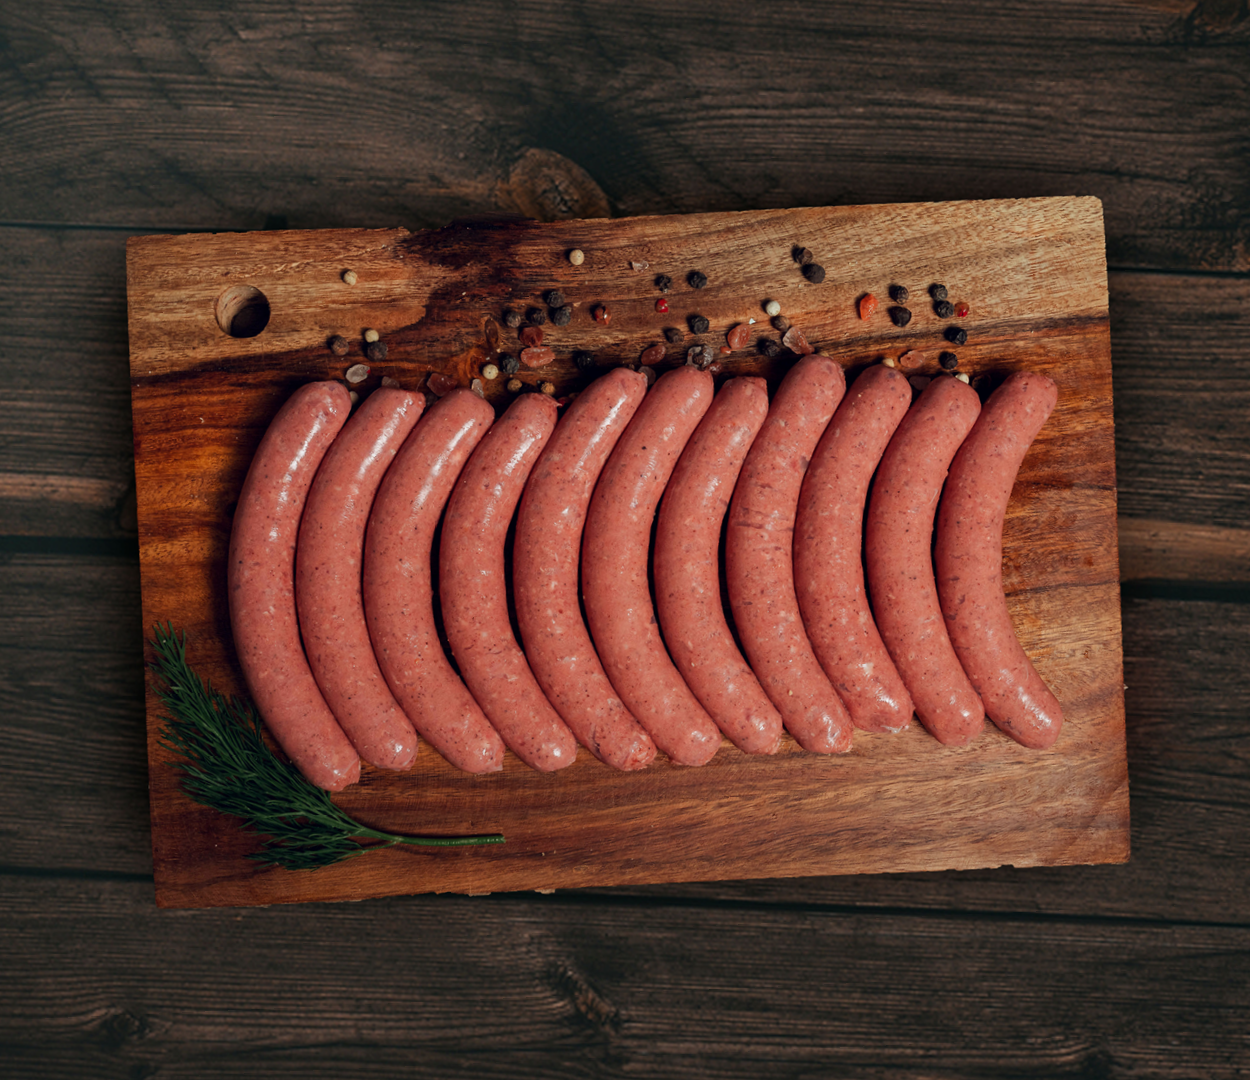 South African Veal | Sausages with Egyptian Spices